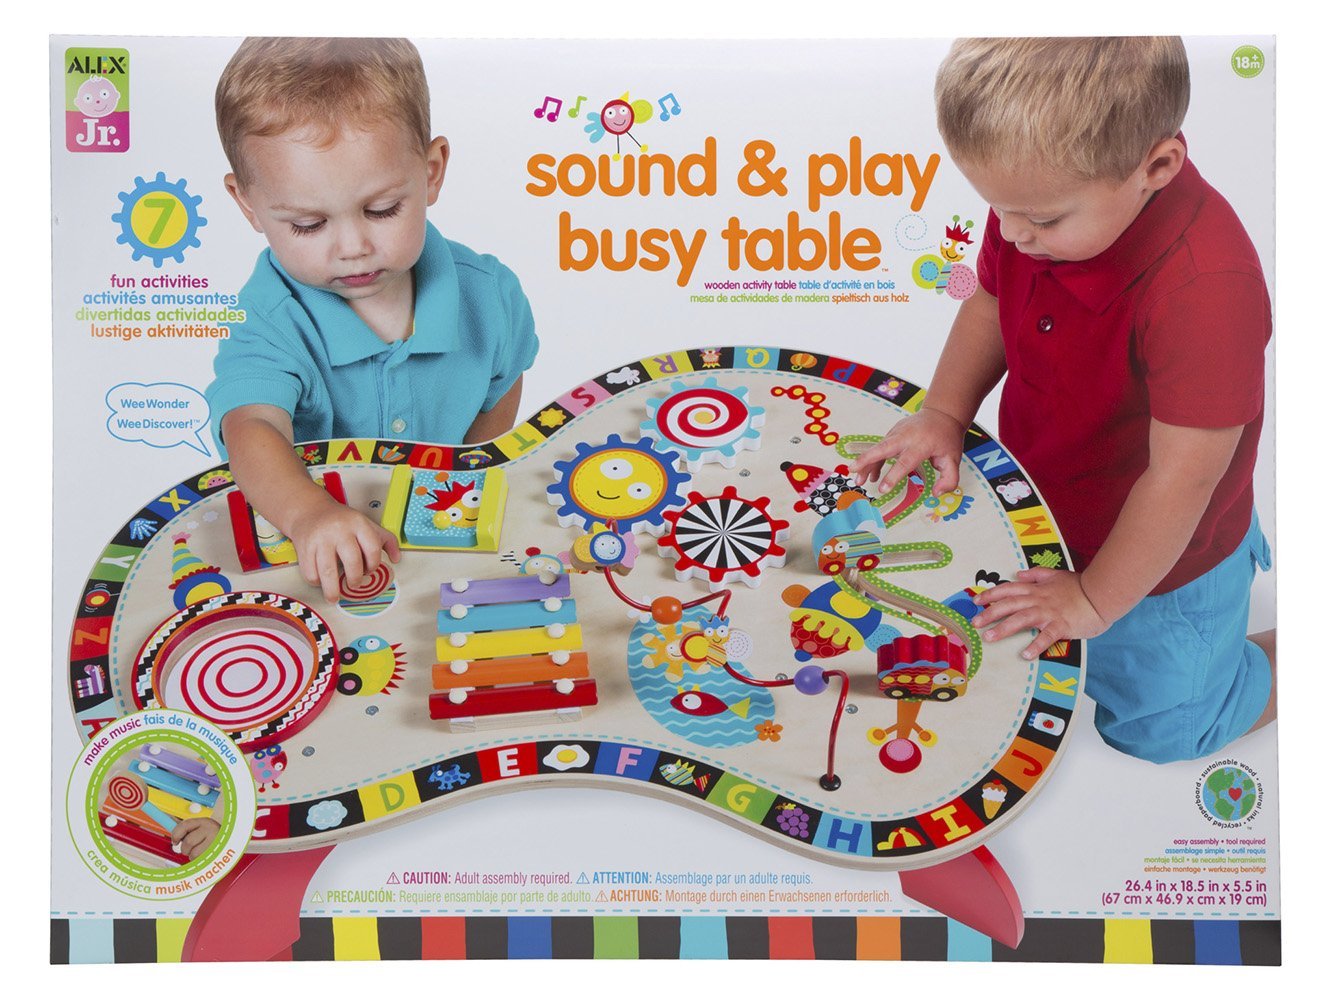 ALEX Junior Sounds and Play Baby Activity Center